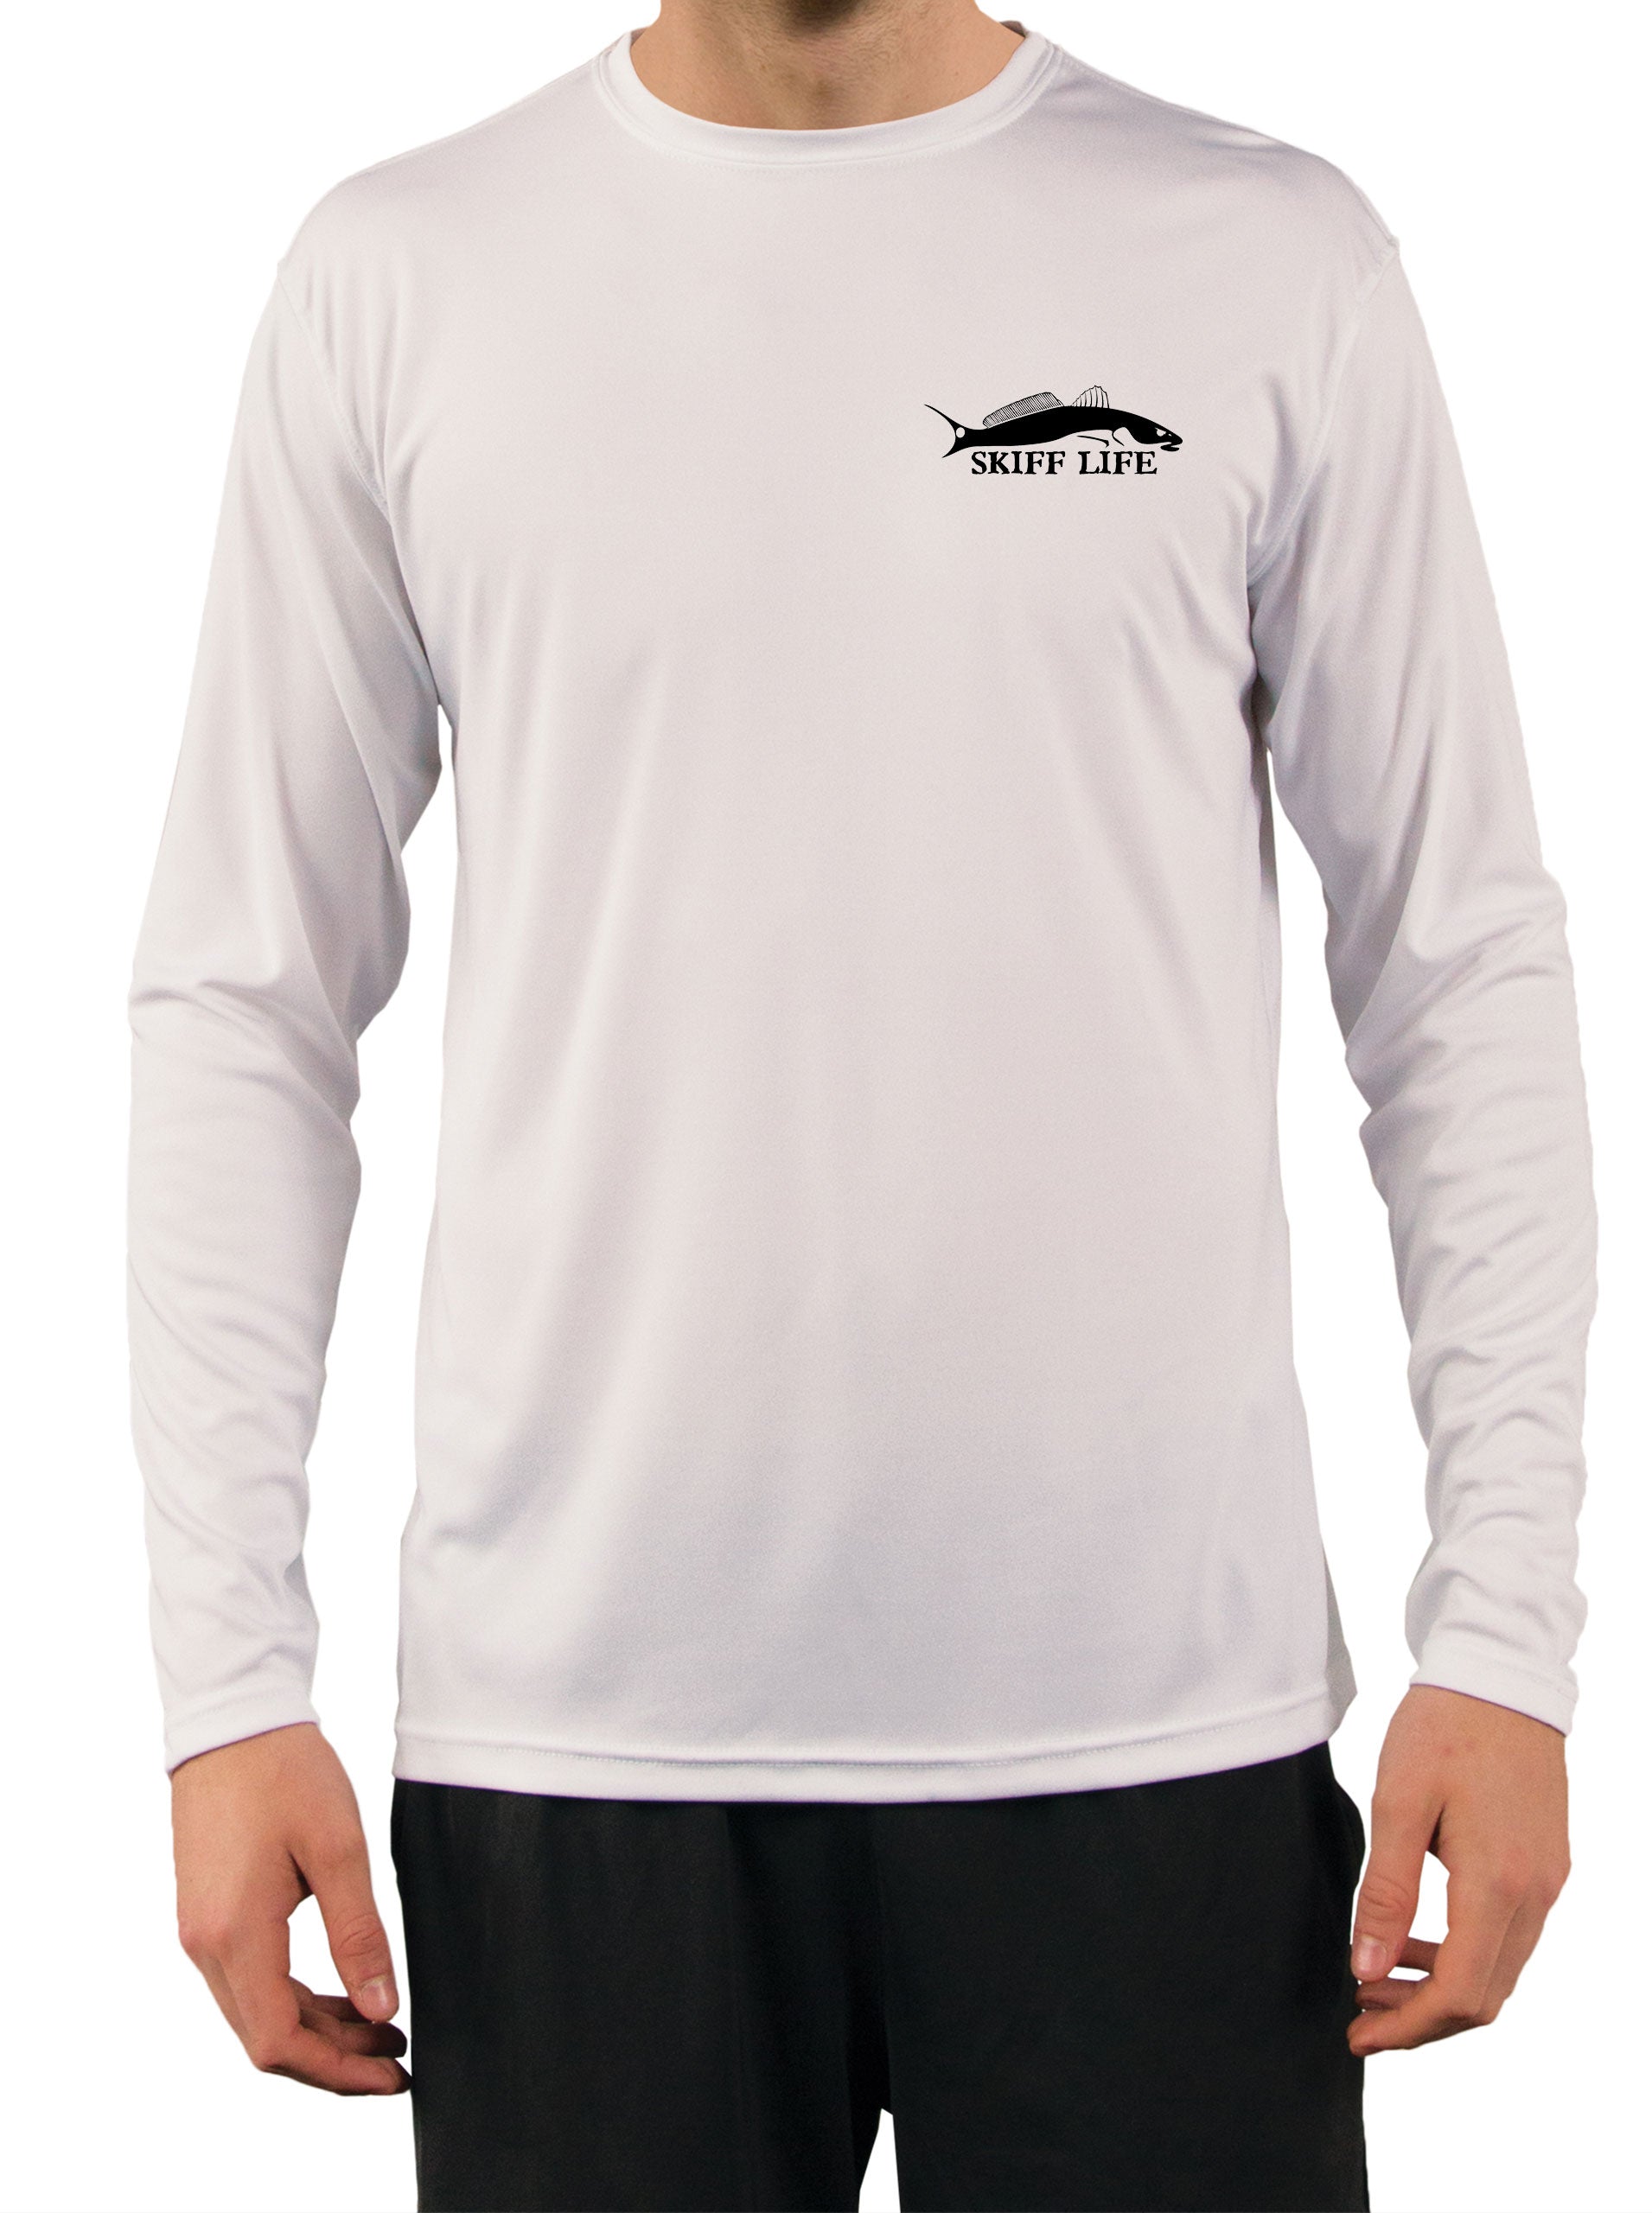 Spotted Sea Trout Chasing Baitfish Fishing Shirts Men's Quick Dry Ligh –  Skiff Life